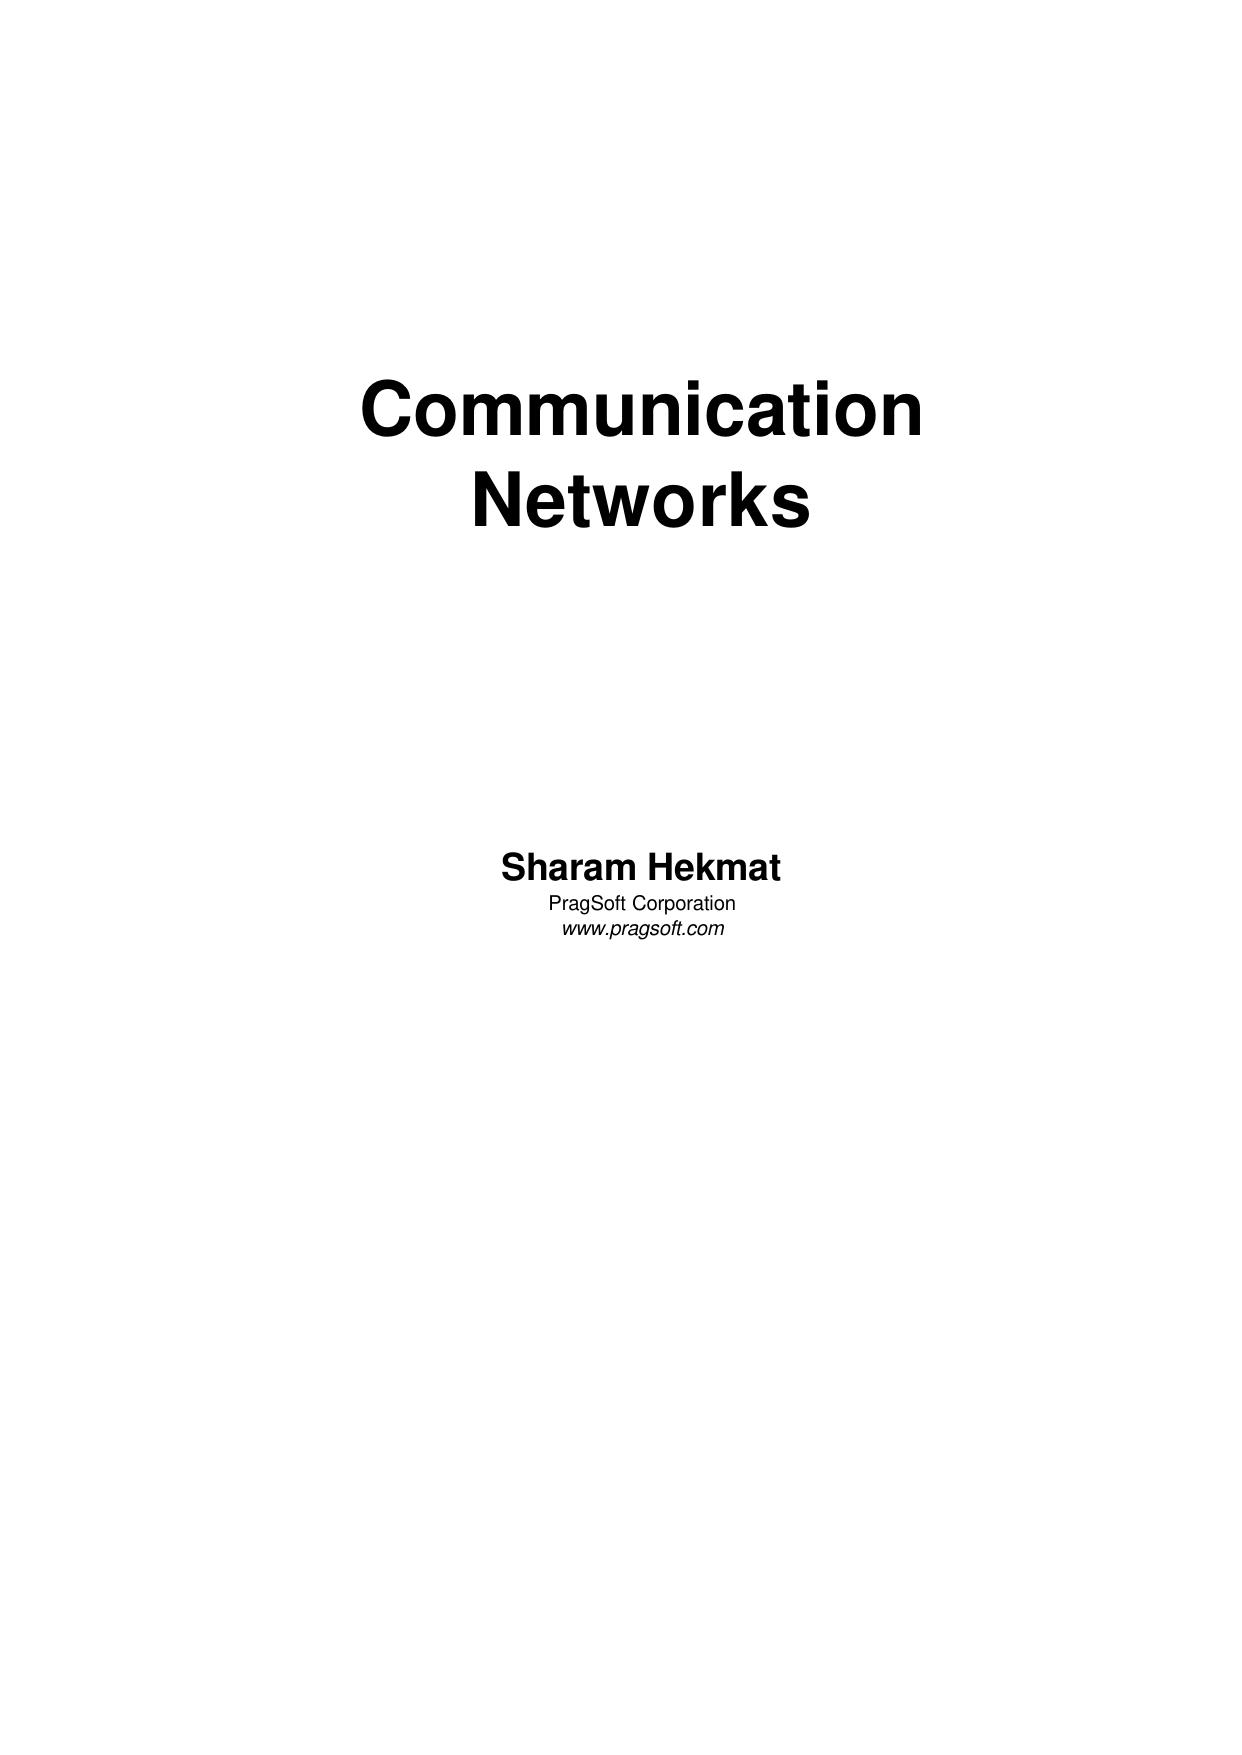 CommNetworks